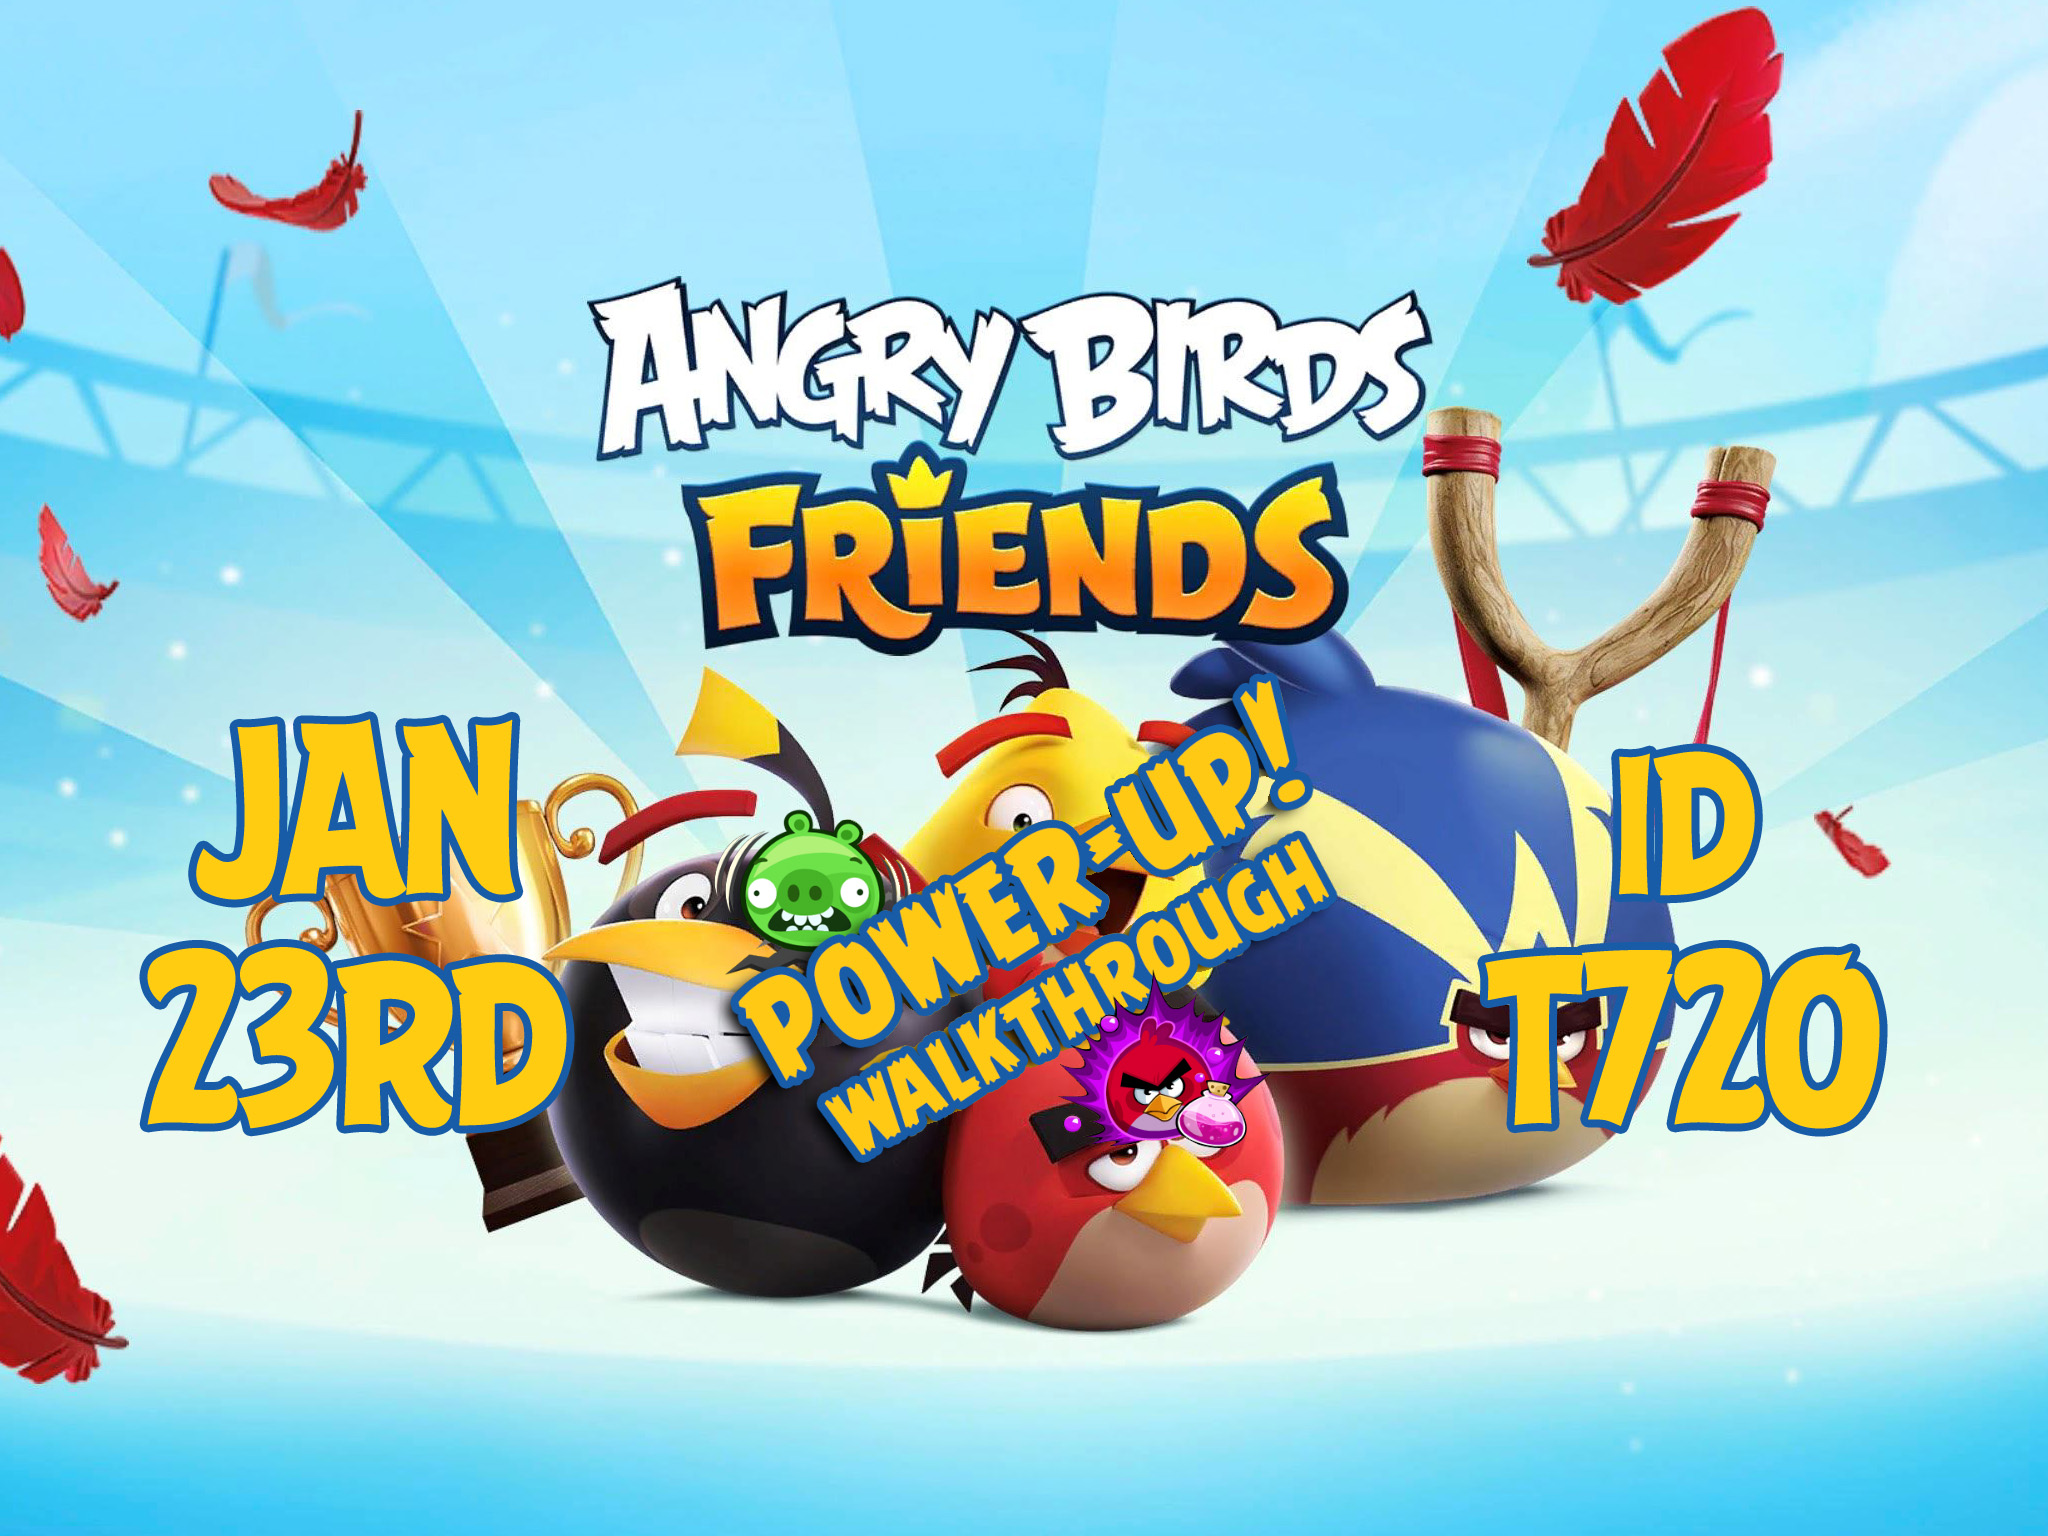 Angry-Birds-Friends-Tournament-T720-Feature-Image-PU